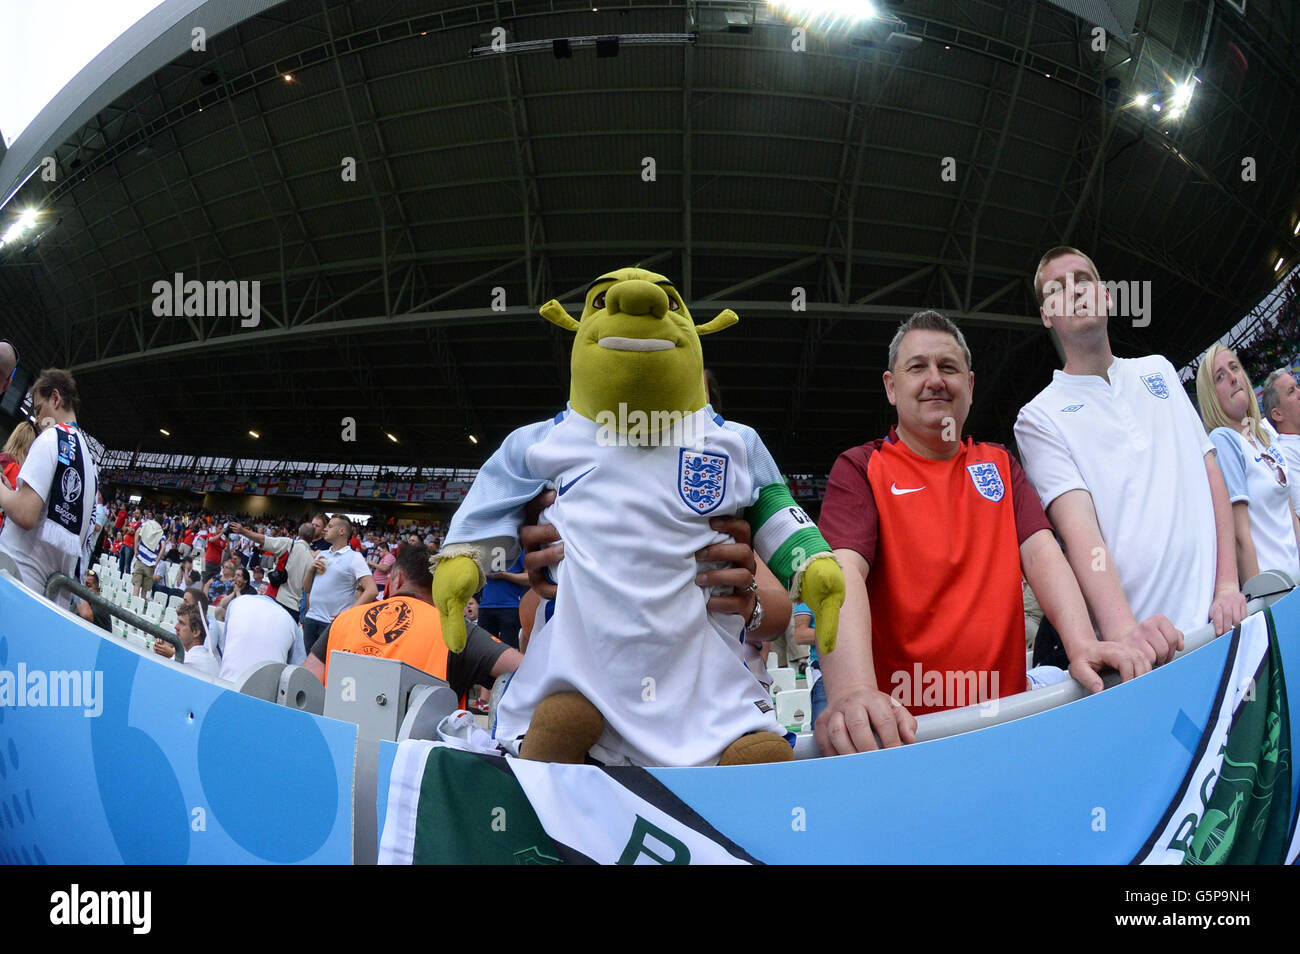 Supporters (England) ;  June 20, 2016 - Football : Uefa Euro France 2016, Group B, Slovakia 0-0 England at Stade Geoffroy Guichard, Saint-Etienne, France. (Photo by aicfoto/AFLO) Stock Photo